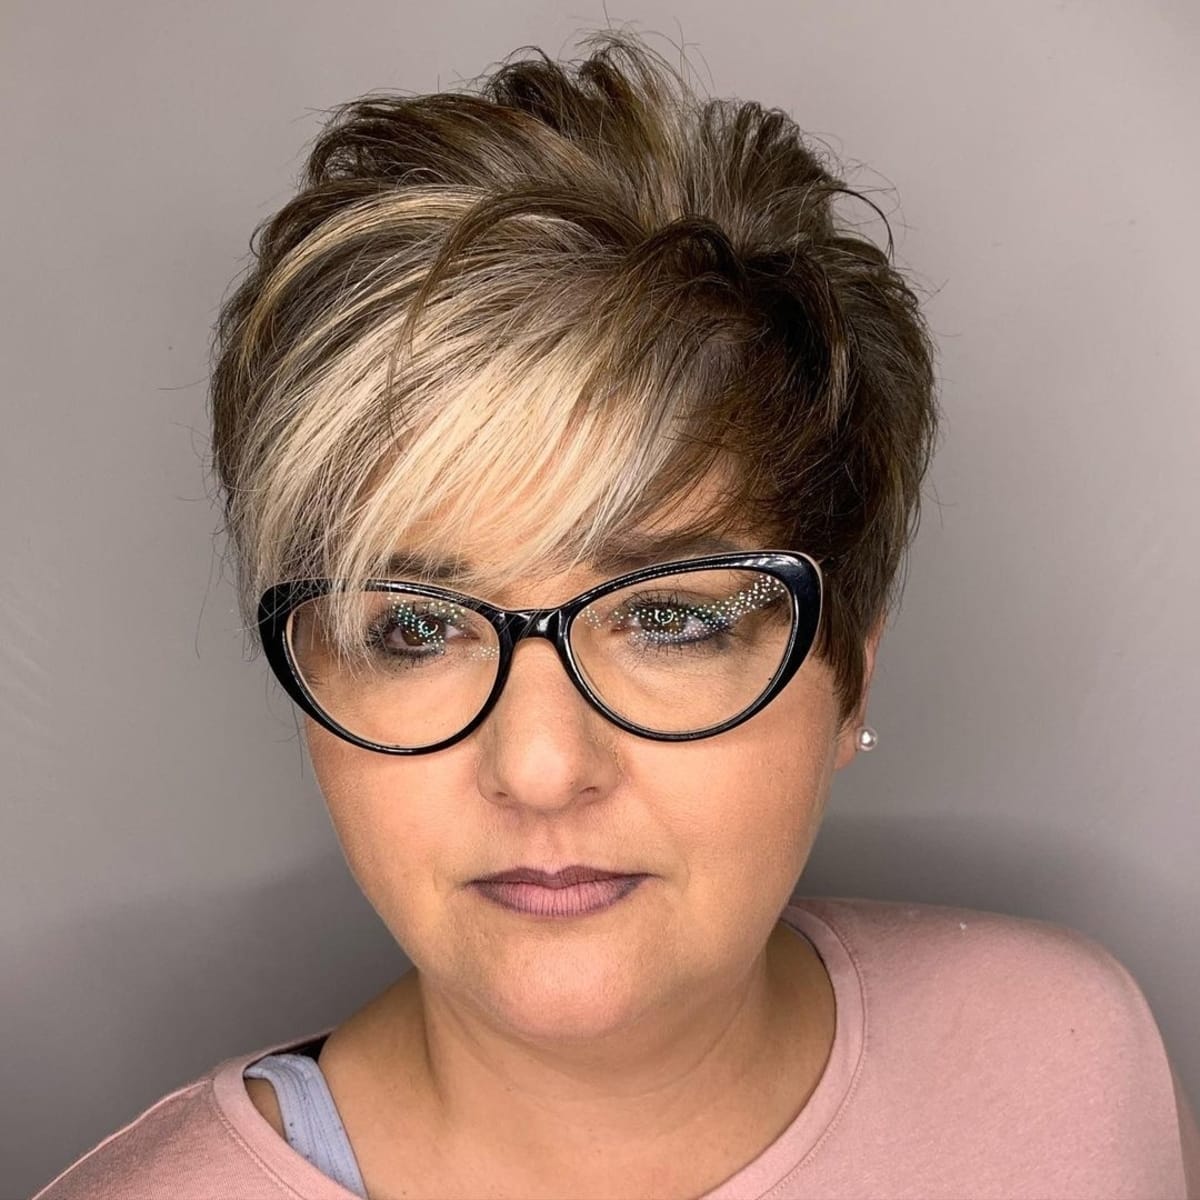 Pixie hairstyle for older women with glasses